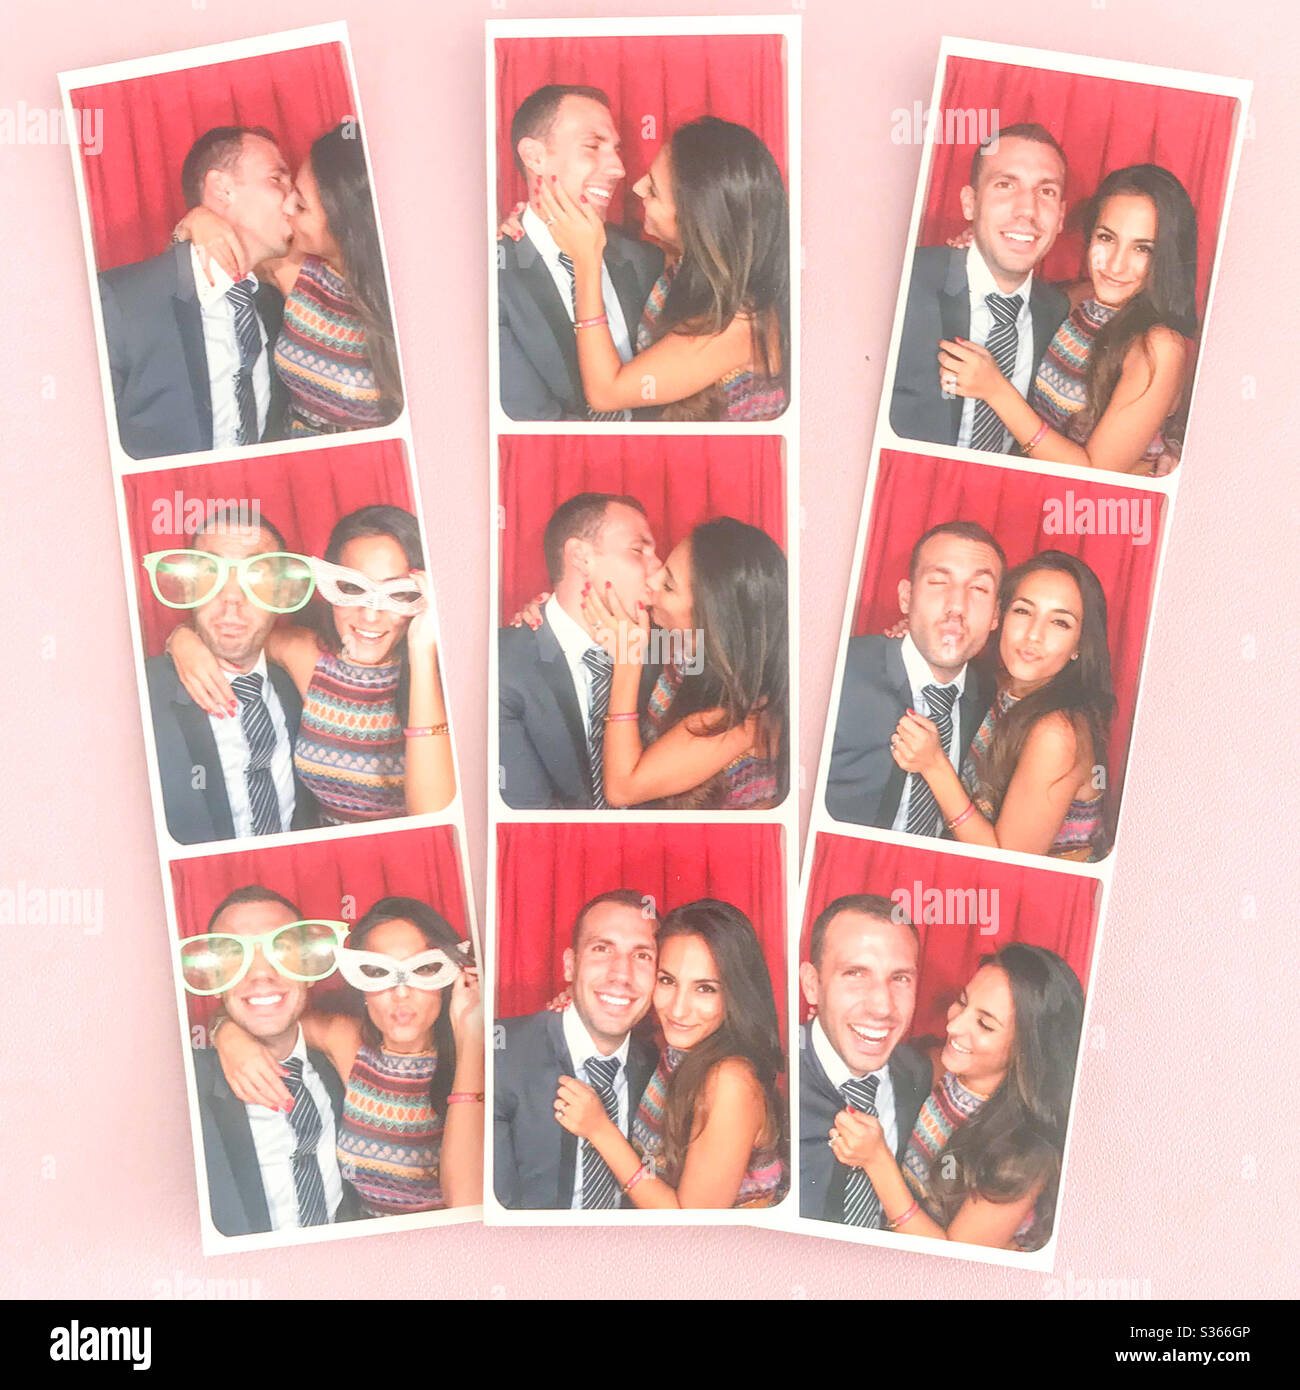 Fun With Enchanted Celebrations Photo Booths - Enchanted Celebrations